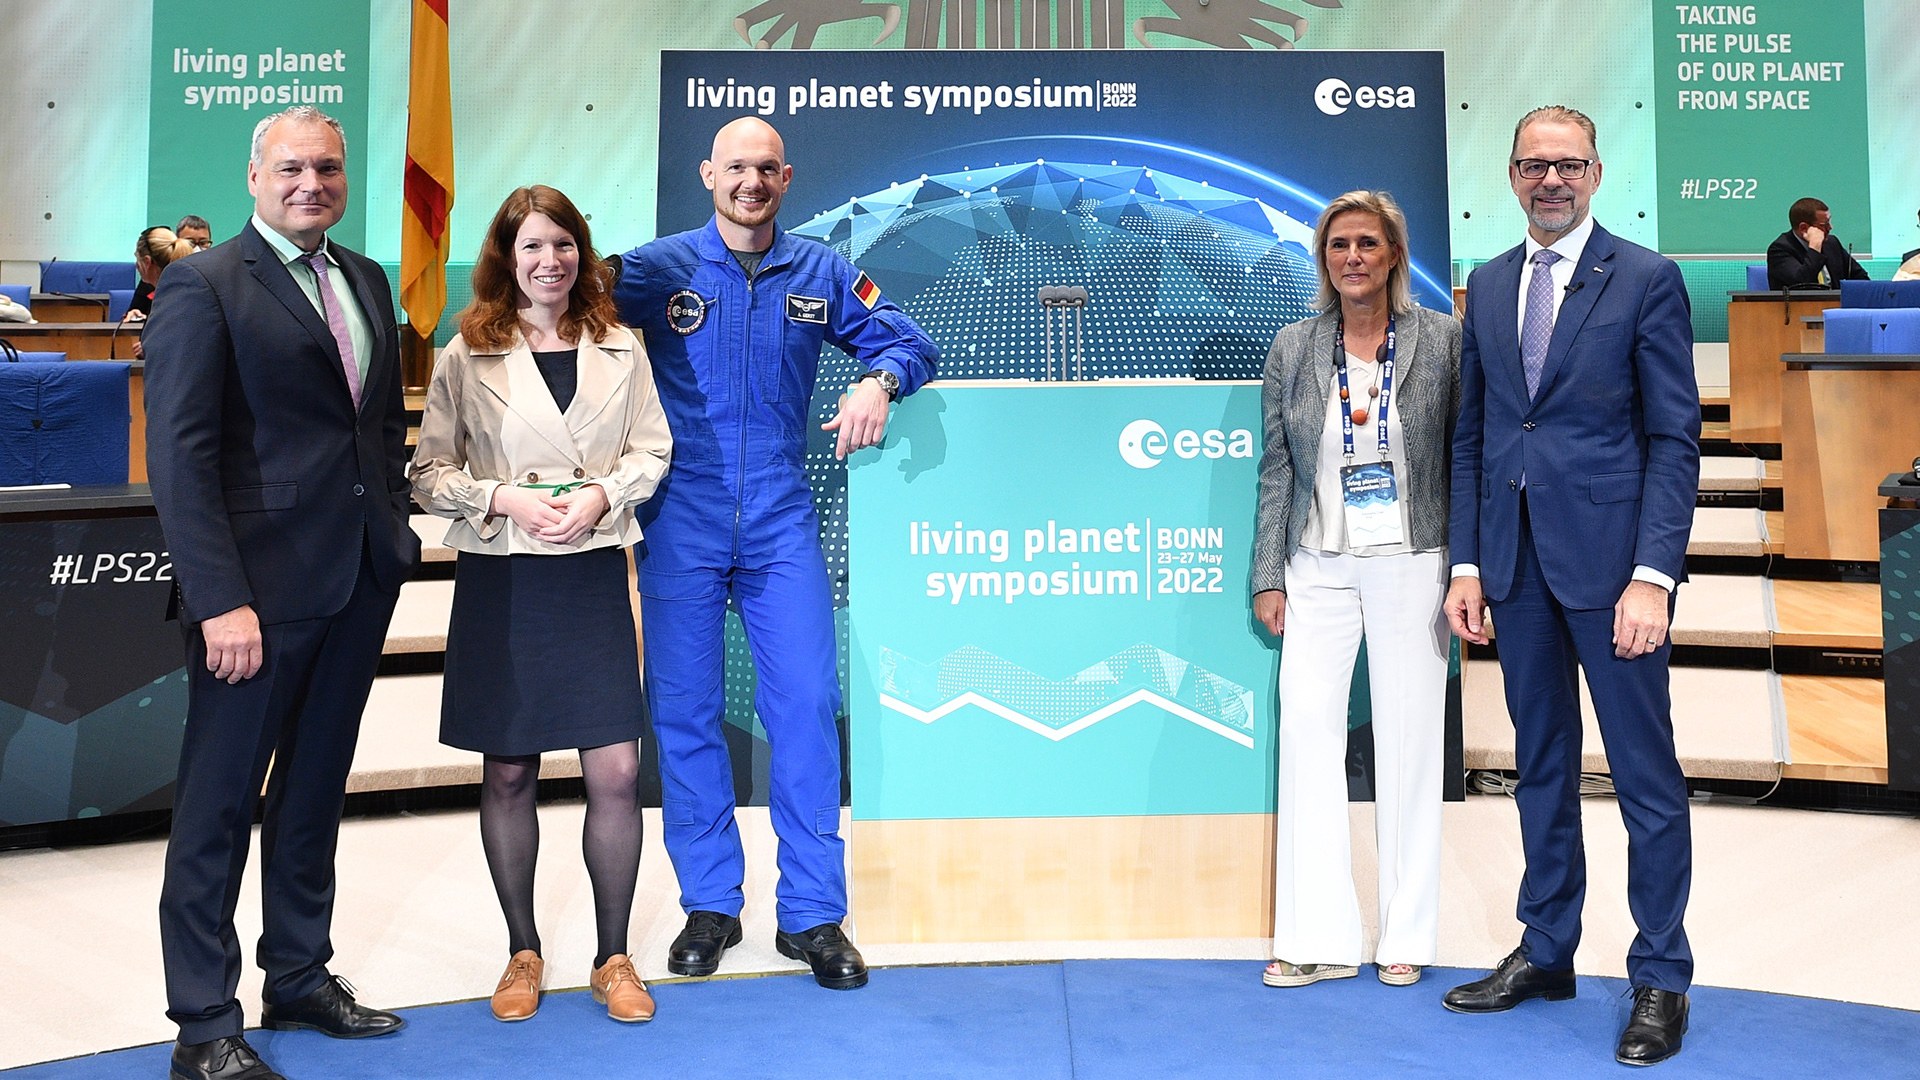 The ESA and DLR Living Planet Symposium opened on 23 May 2022